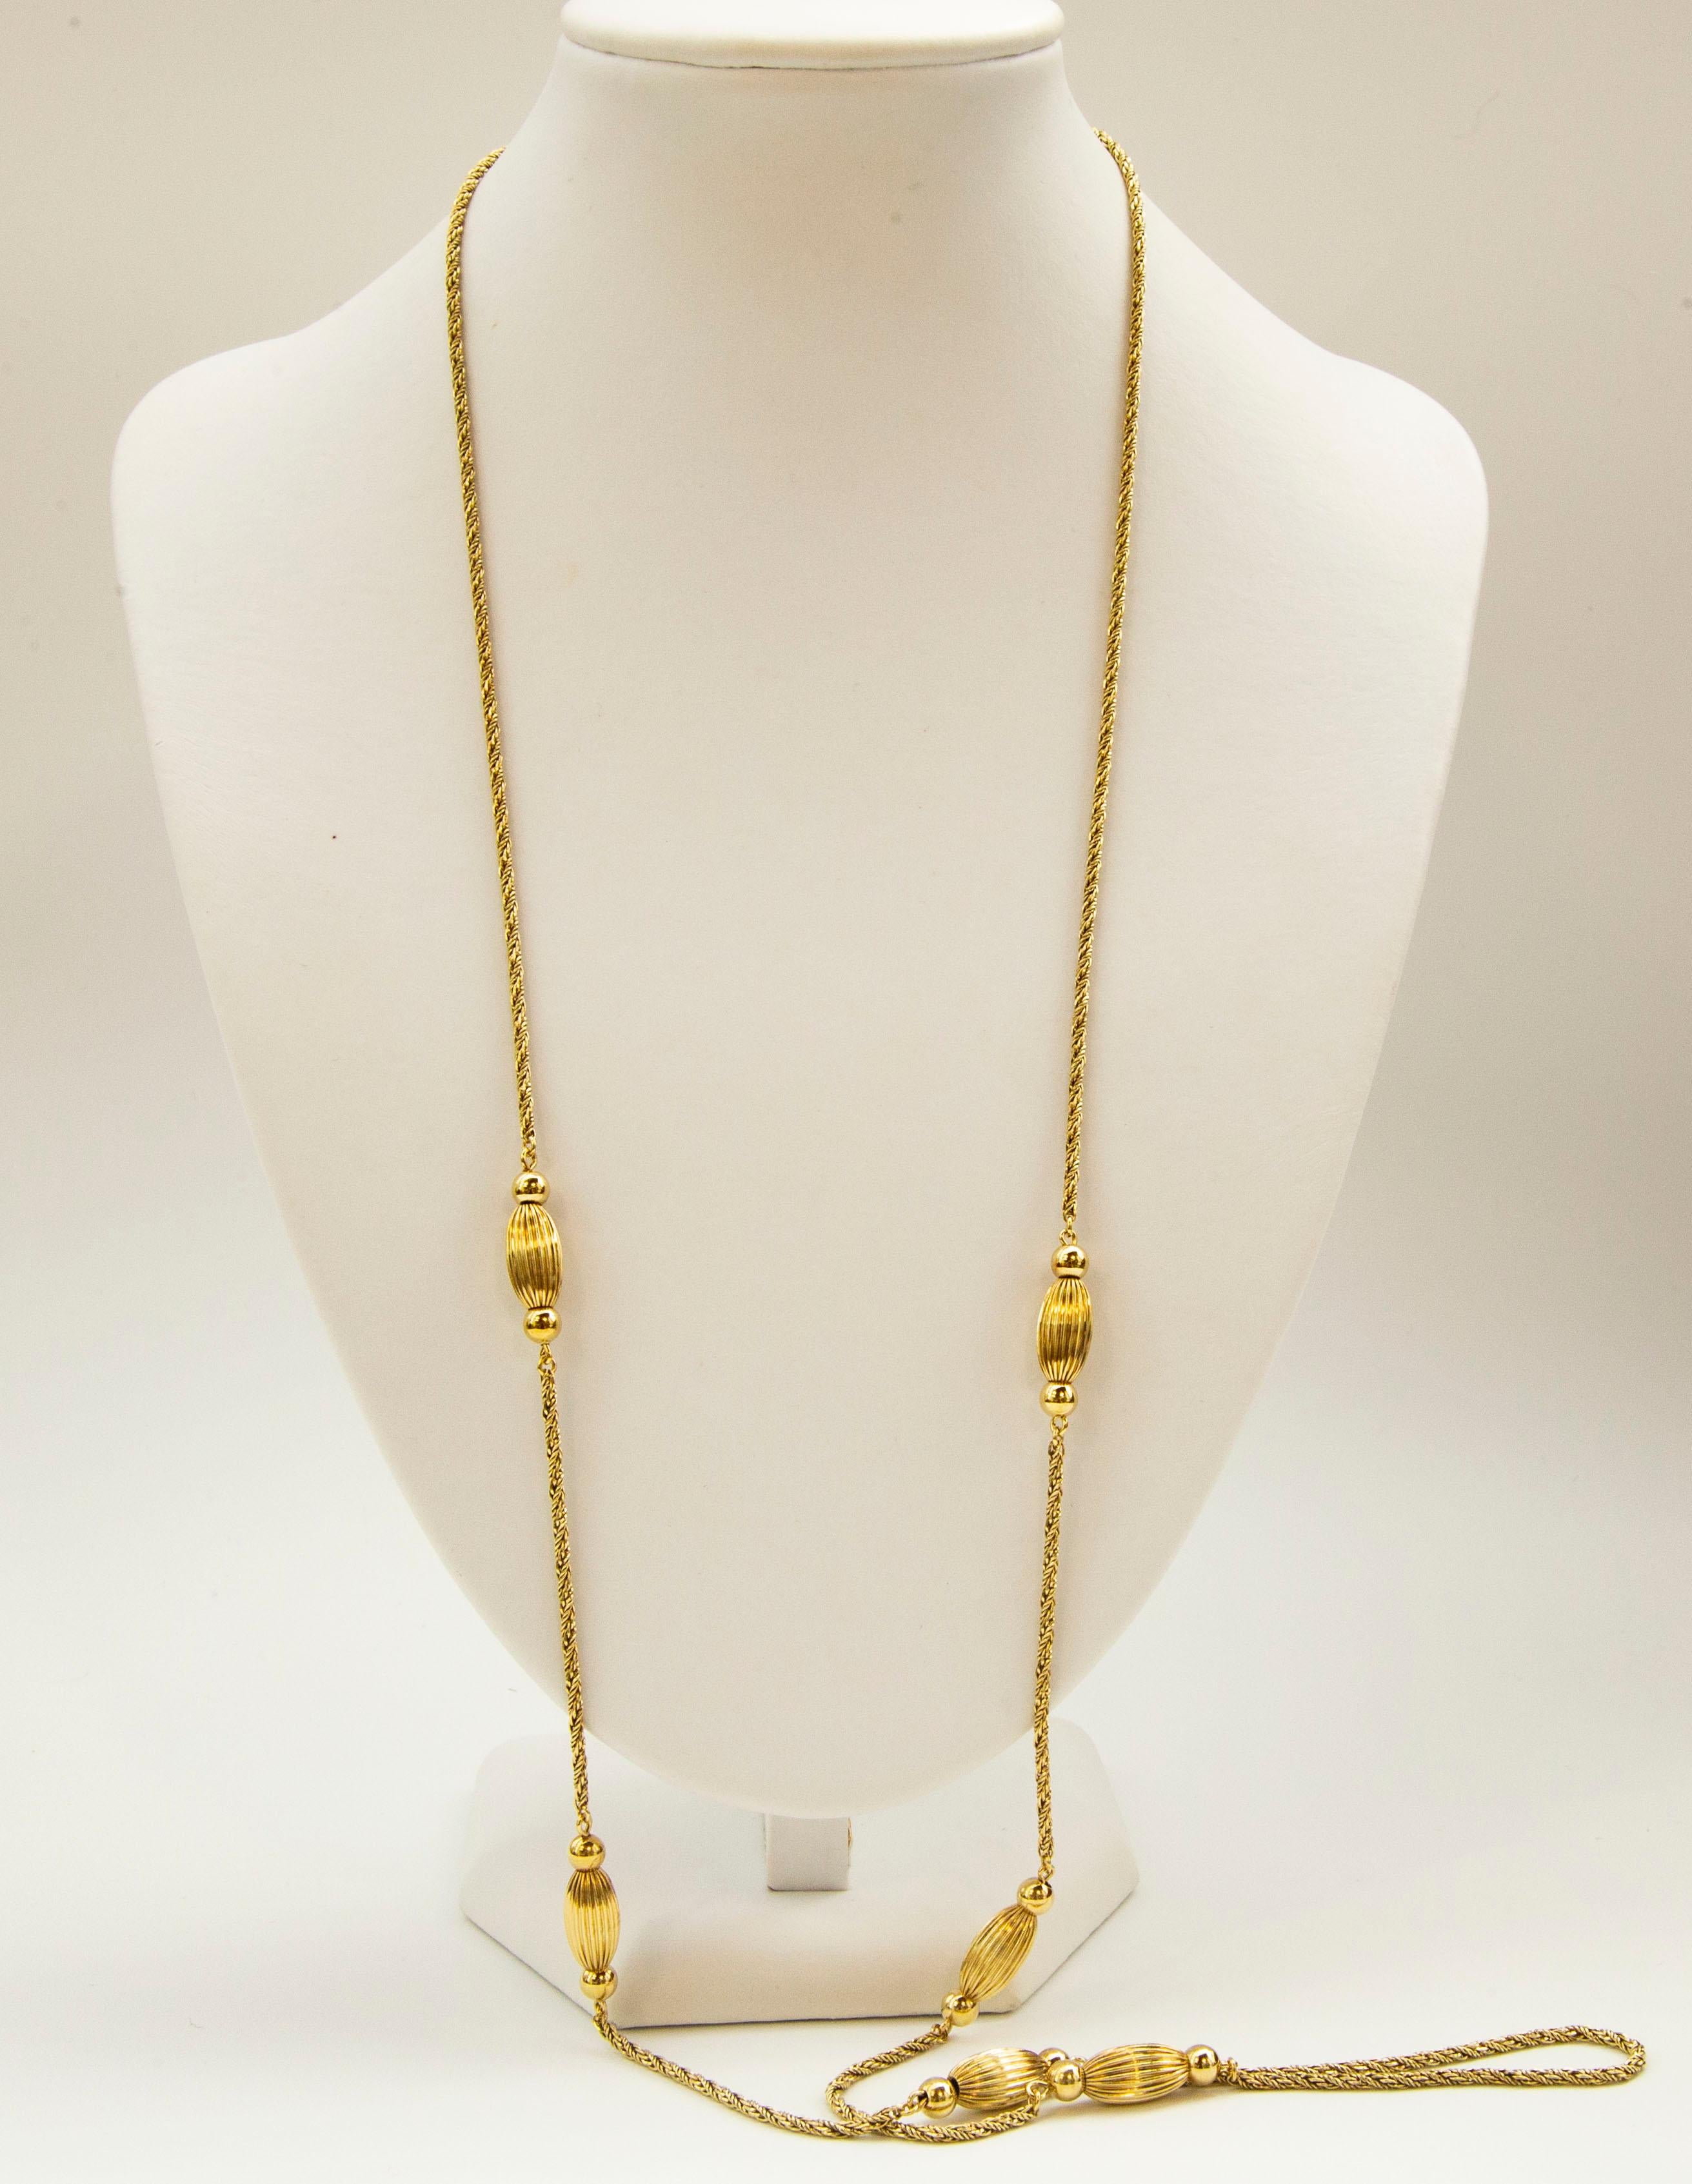 A vintage 14 karat solid yellow gold necklace with ribbed spheres and oval shaped balls. The necklace features a double rope chain and it closes with a spring ring clasp.  
The necklace has an elegant appearance and it would be a great addition to